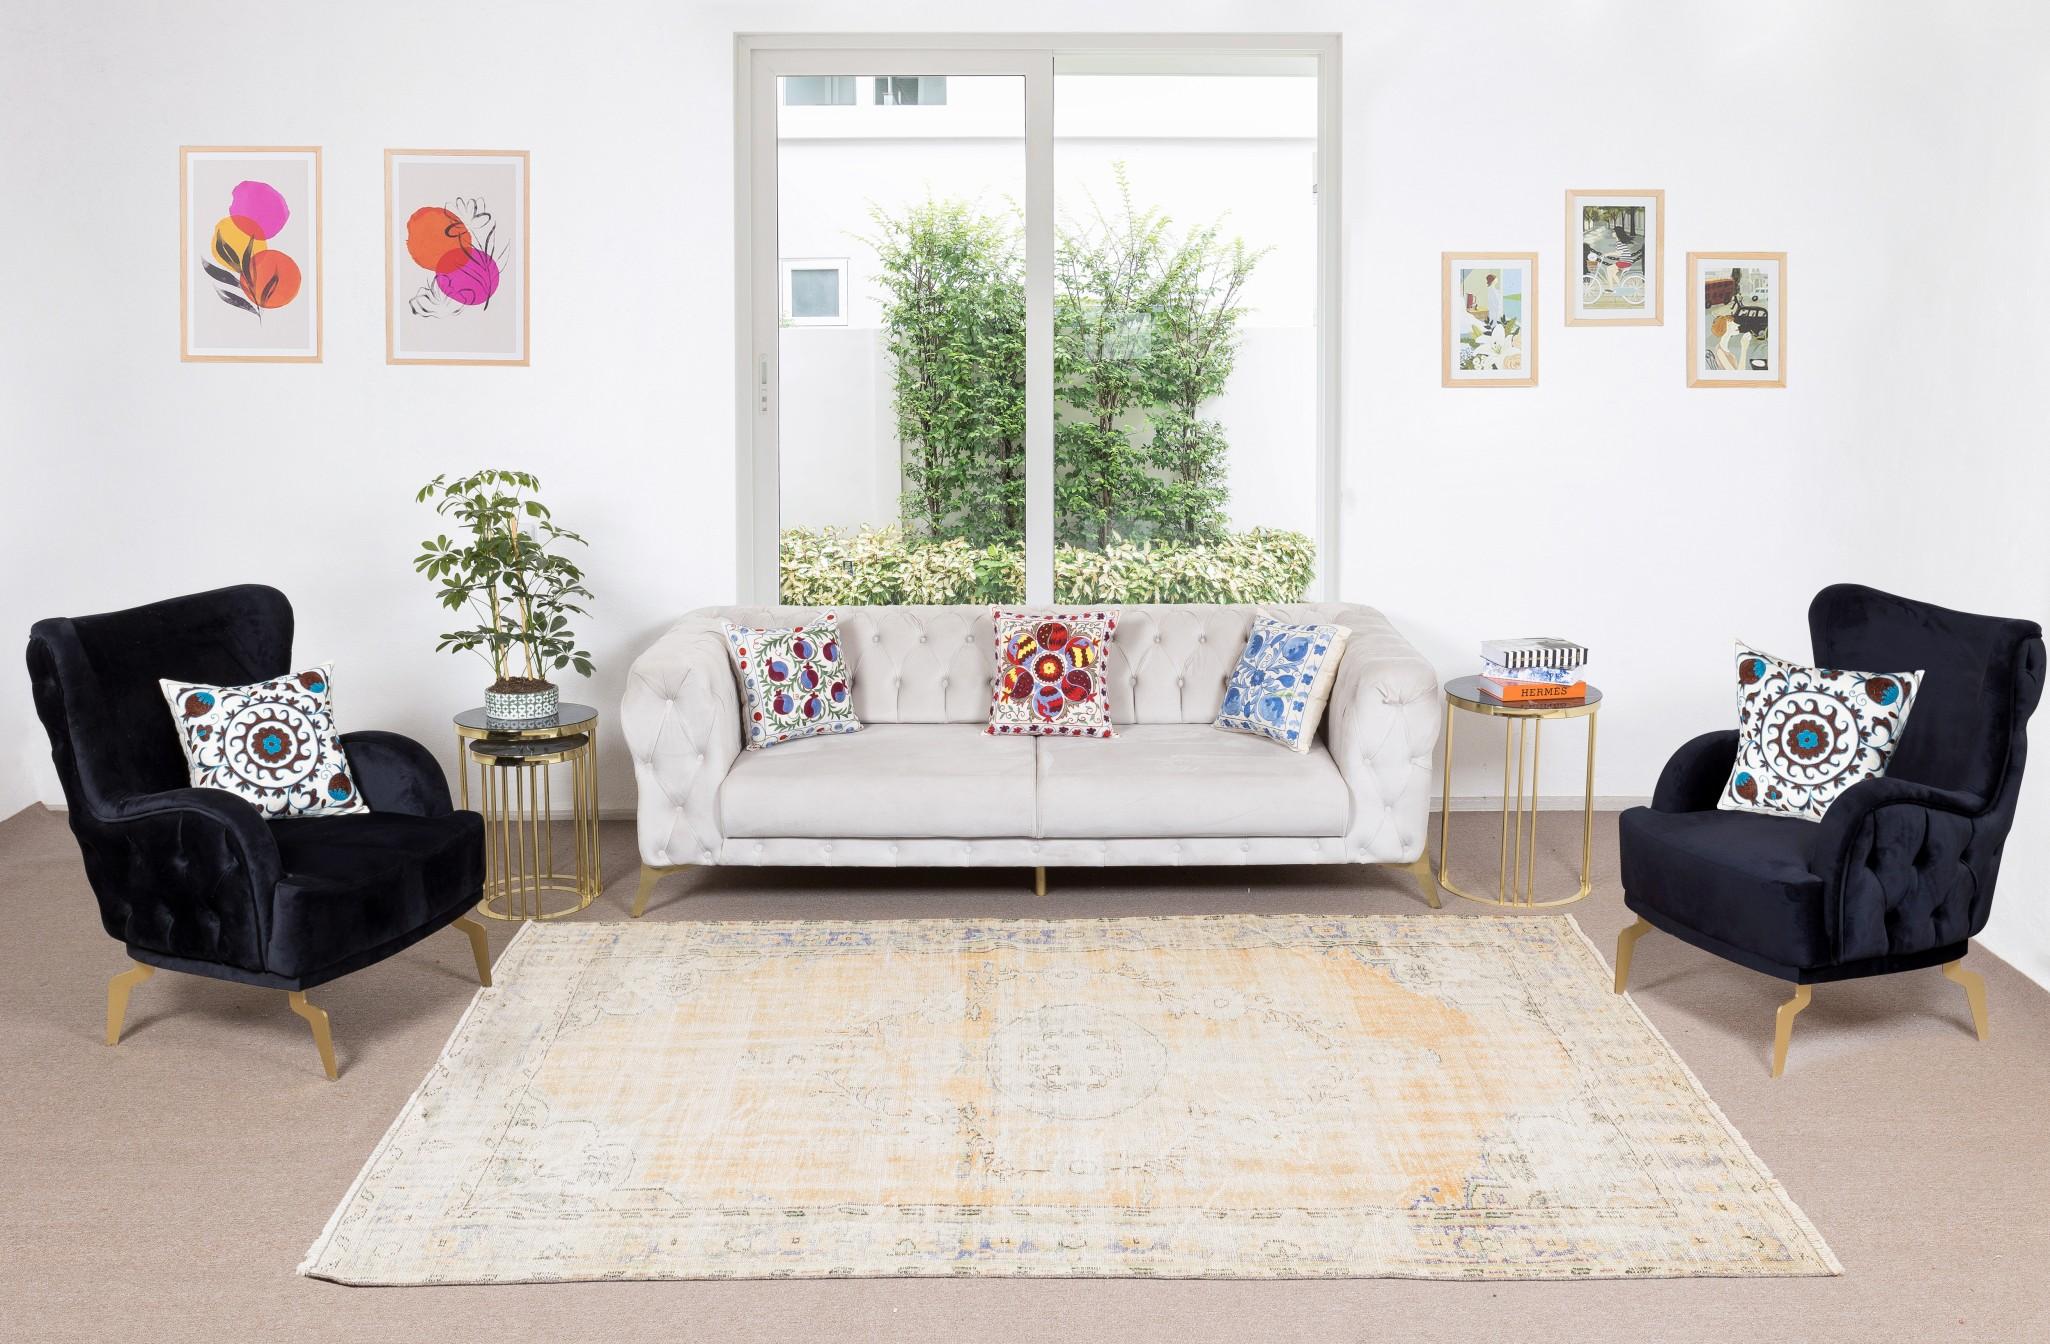 Our sun-faded rugs are all one-of-a-kind, hand knotted, 50-70 year-old vintage pieces. They each boast their own singular handmade aesthetic drawn from the centuries-old Turkish rug-weaving traditions. These rugs are made completely of sheep’s wool,